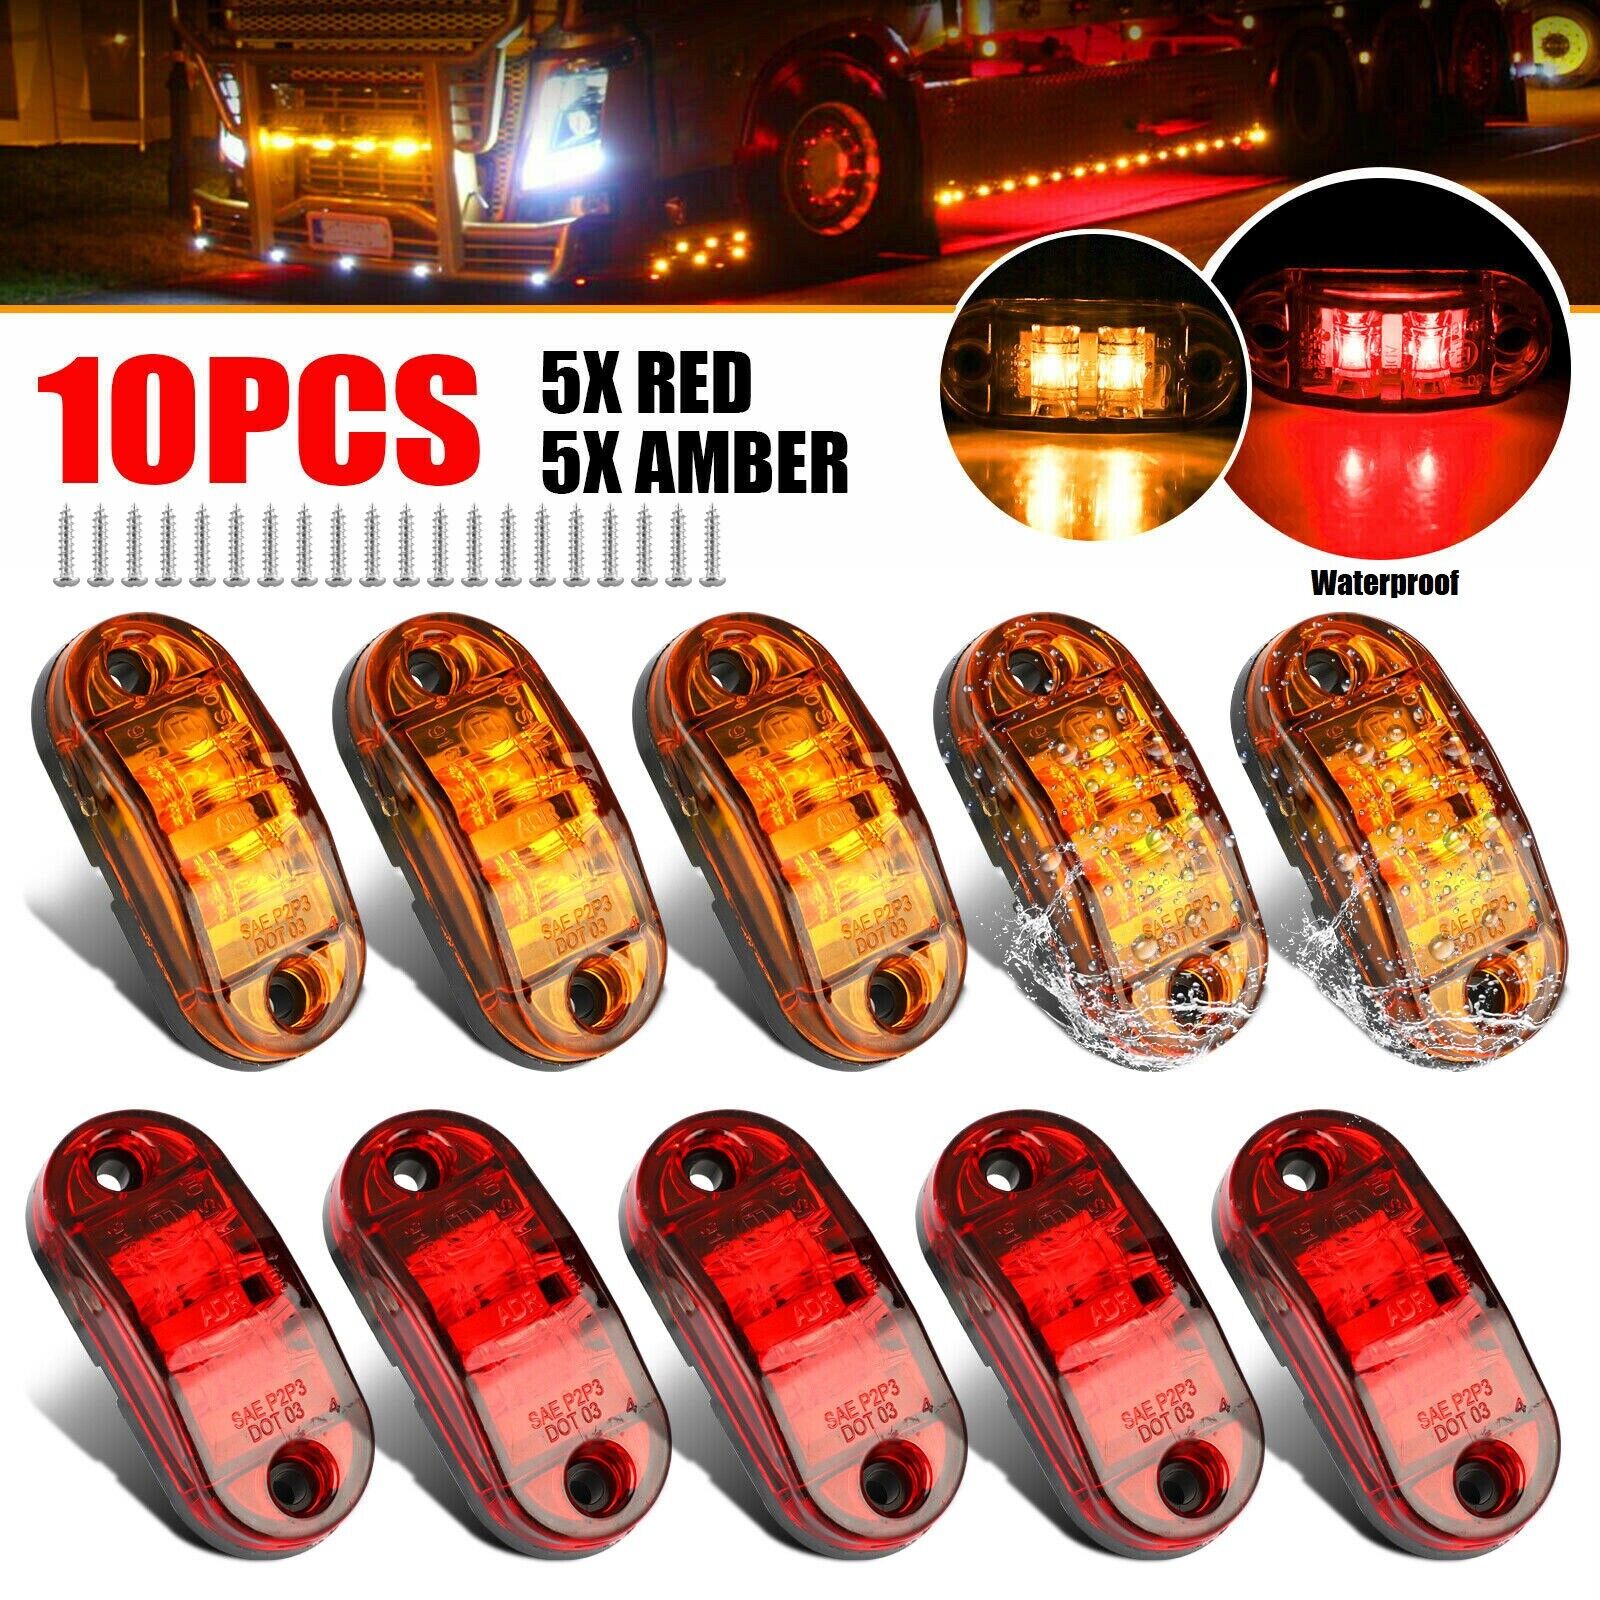 5x Amber+ 5x Red LED Car Truck Trailer RV Oval 2.5